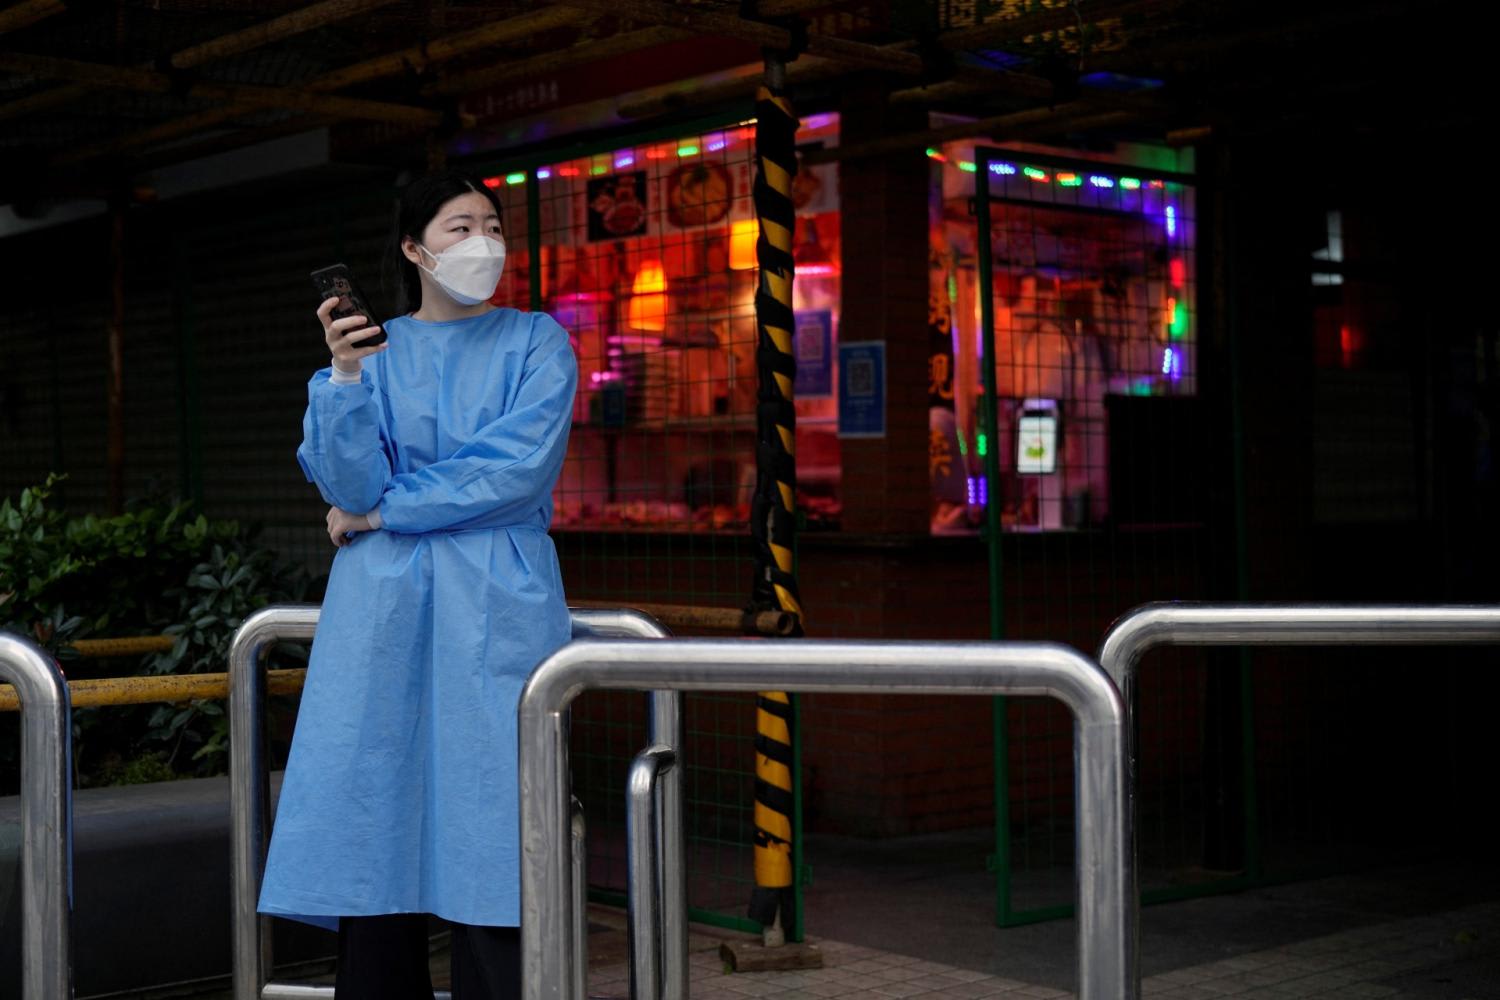 A woman wearing protective gear stands near a food store behind makeshift fences, after the lockdown placed to curb the Covid-19 outbreak was lifted in Shanghai, China on June 2, 2022.